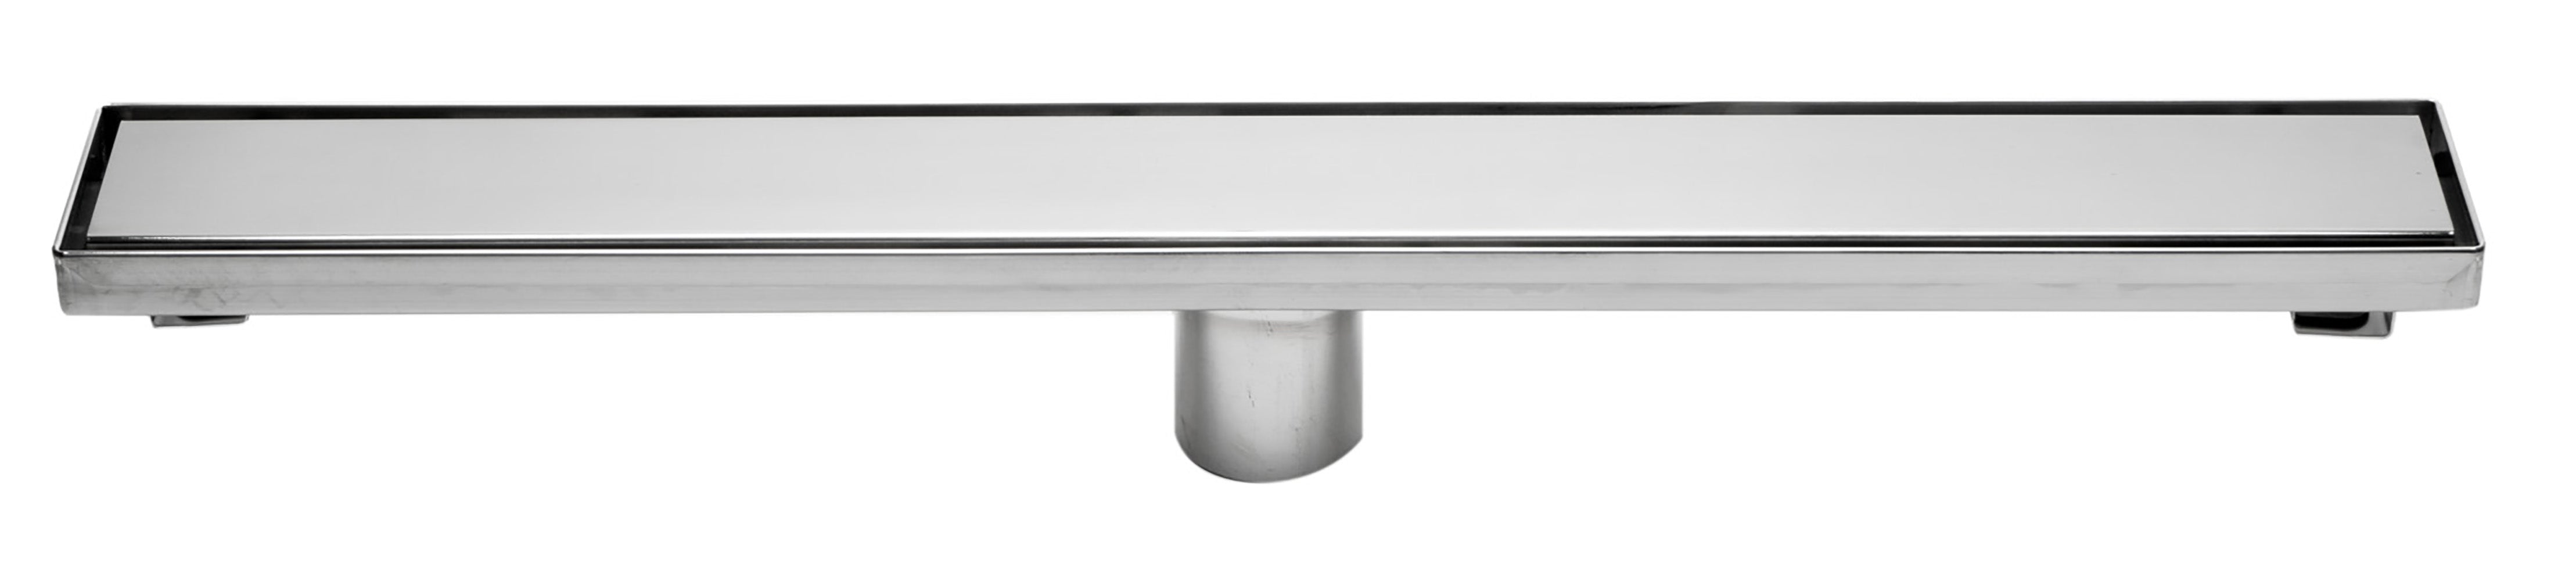 ALFI ABLD24B Modern Linear Shower Drain with Solid Cover (24-inch)